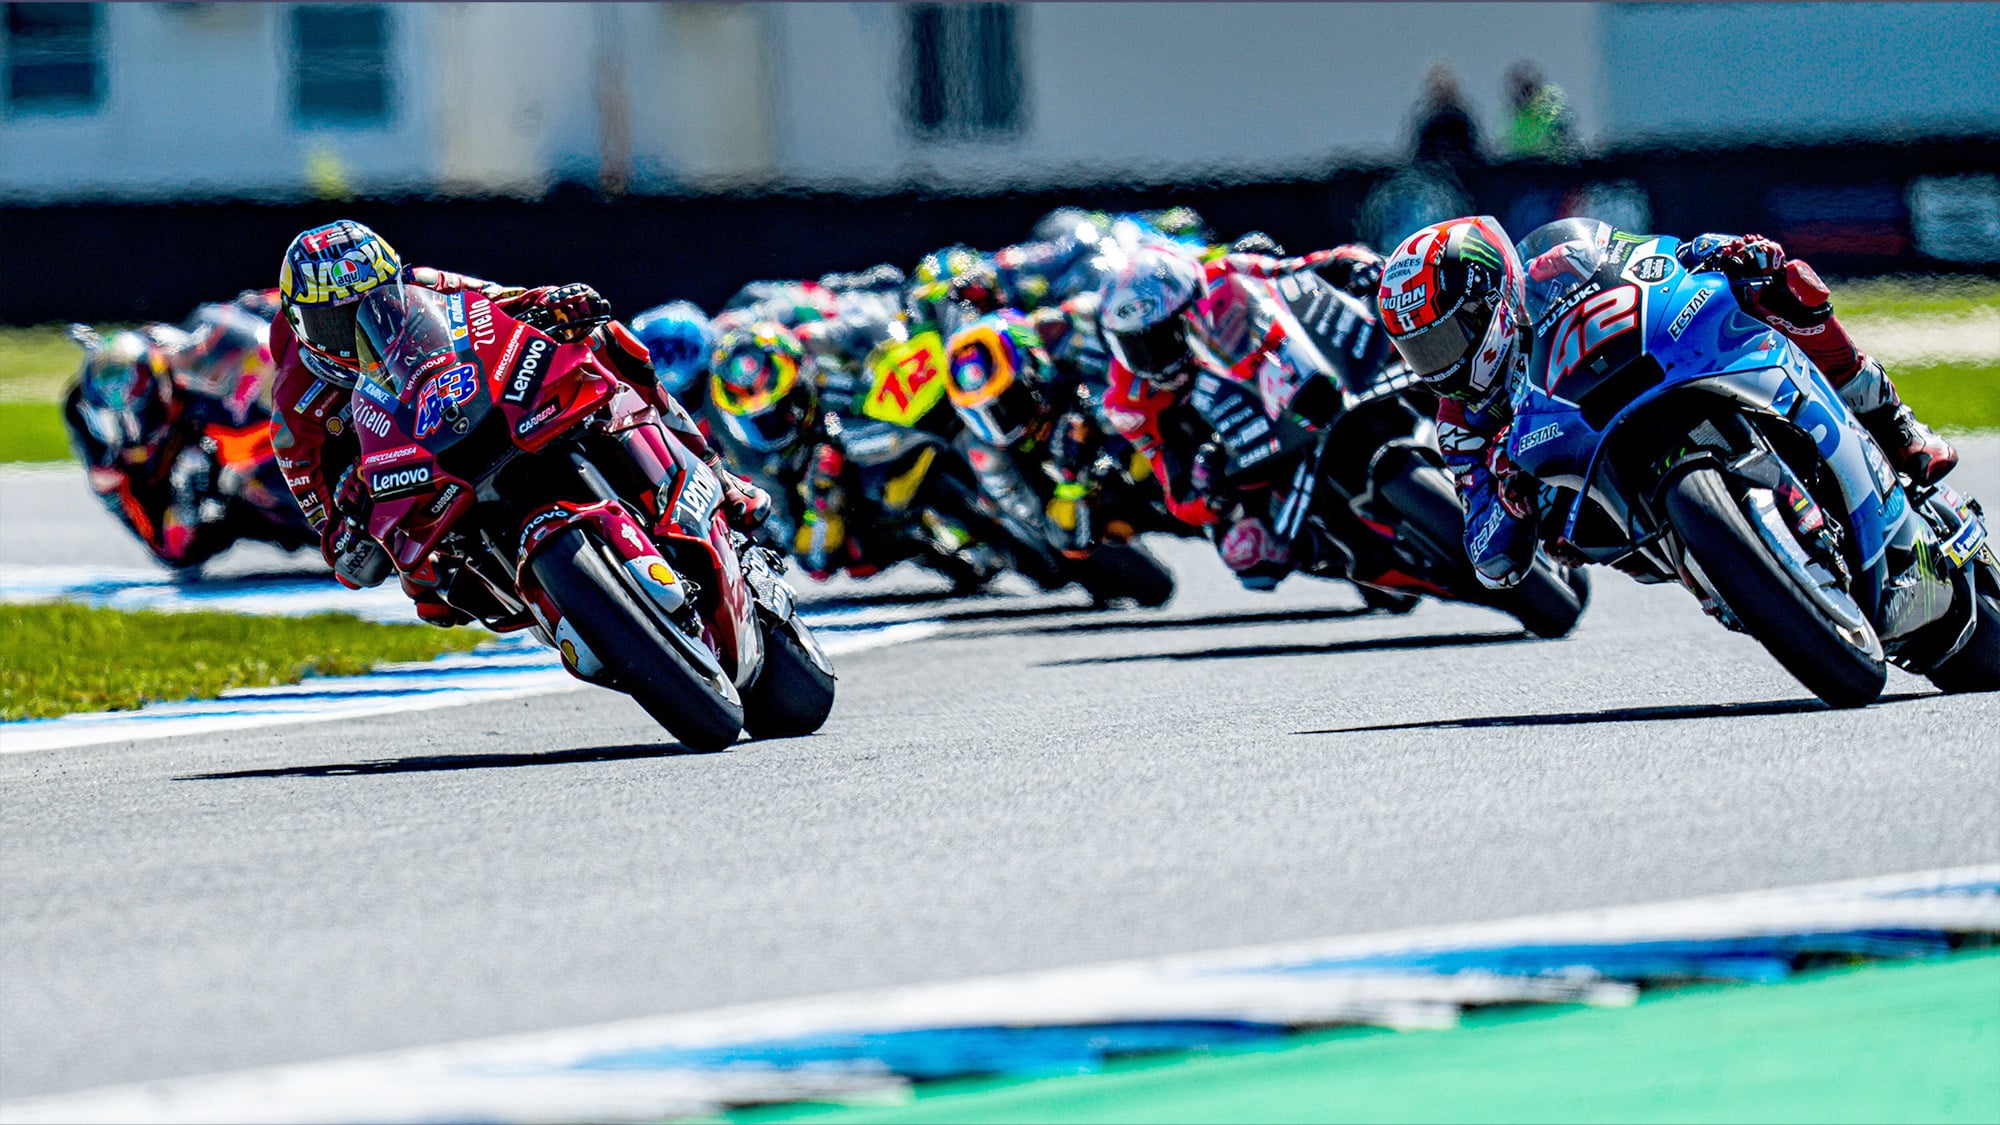 How close is MotoGP? worst motorcycle on the grid is just 0.4% slower than the best! - Motor Sport